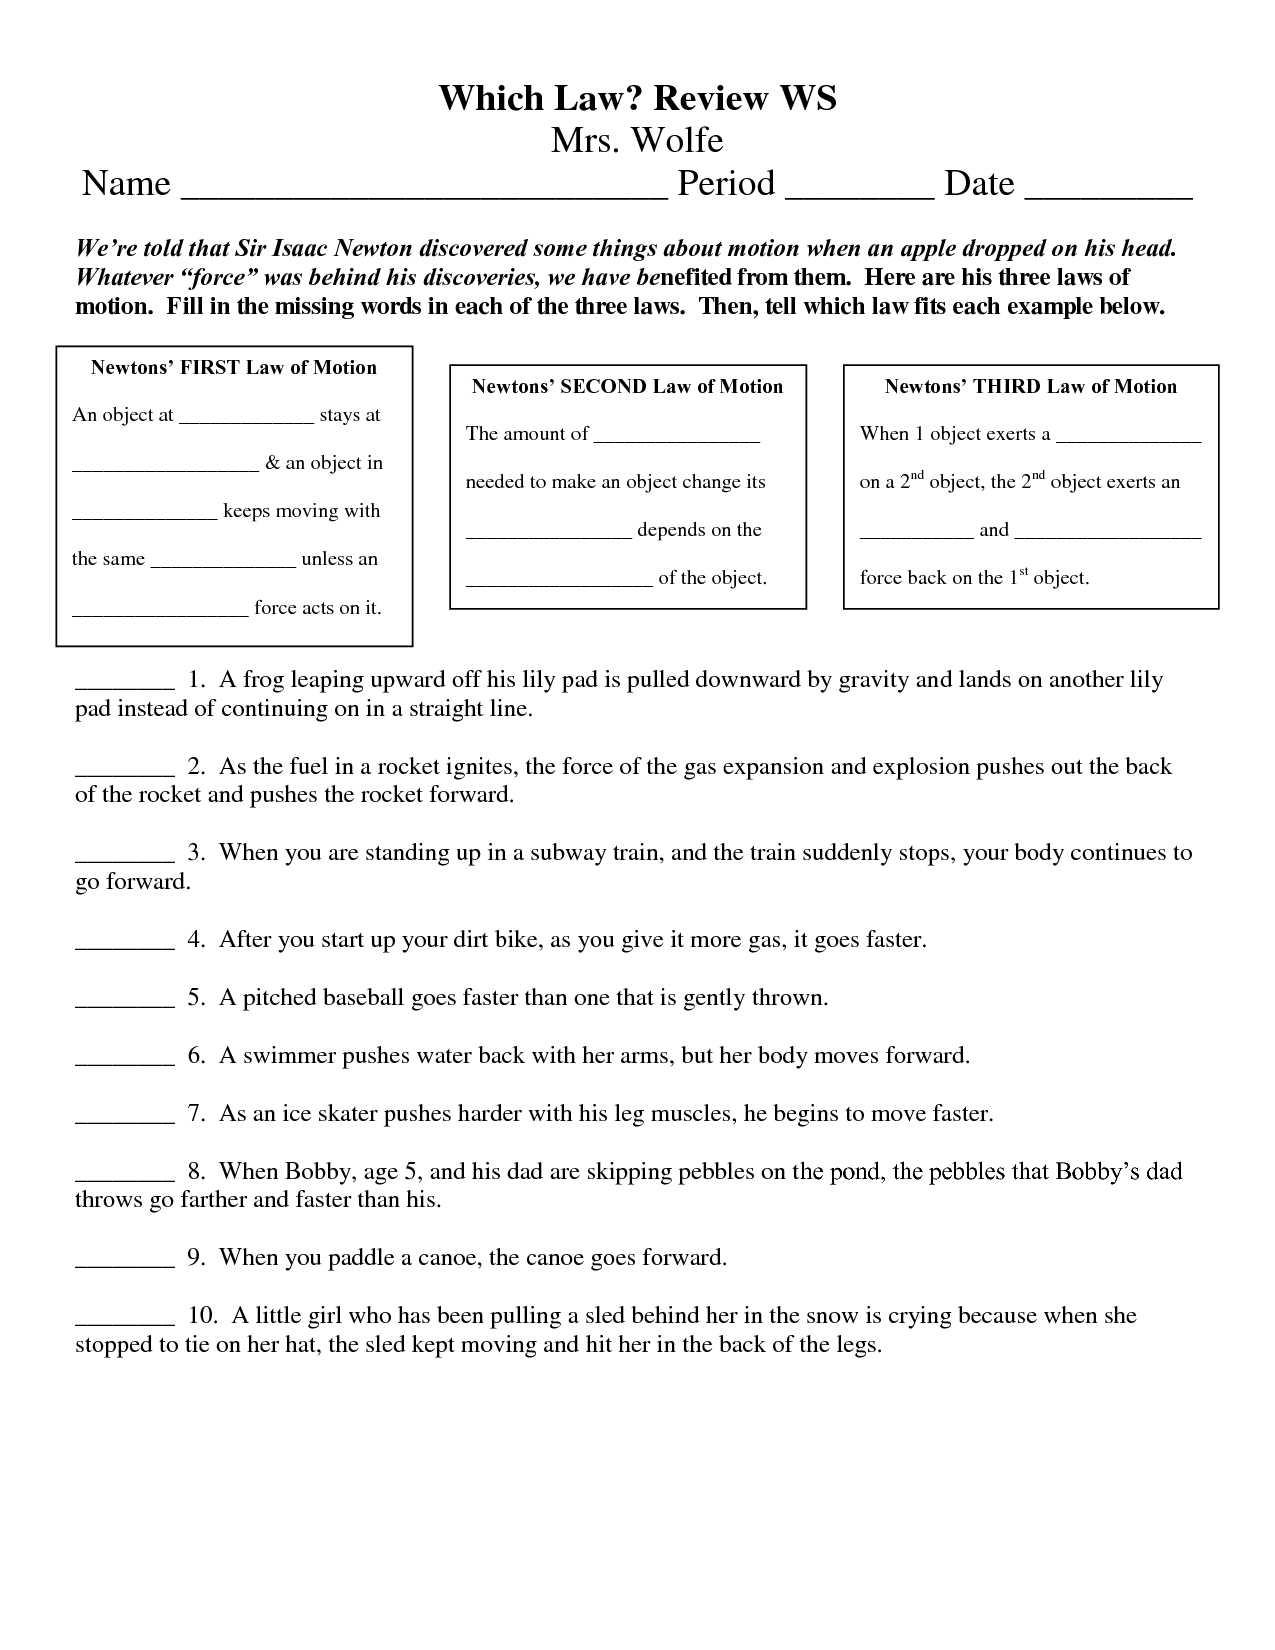 Waves Worksheet Answer Key Physics Along with 3 Laws Of Motion Worksheets